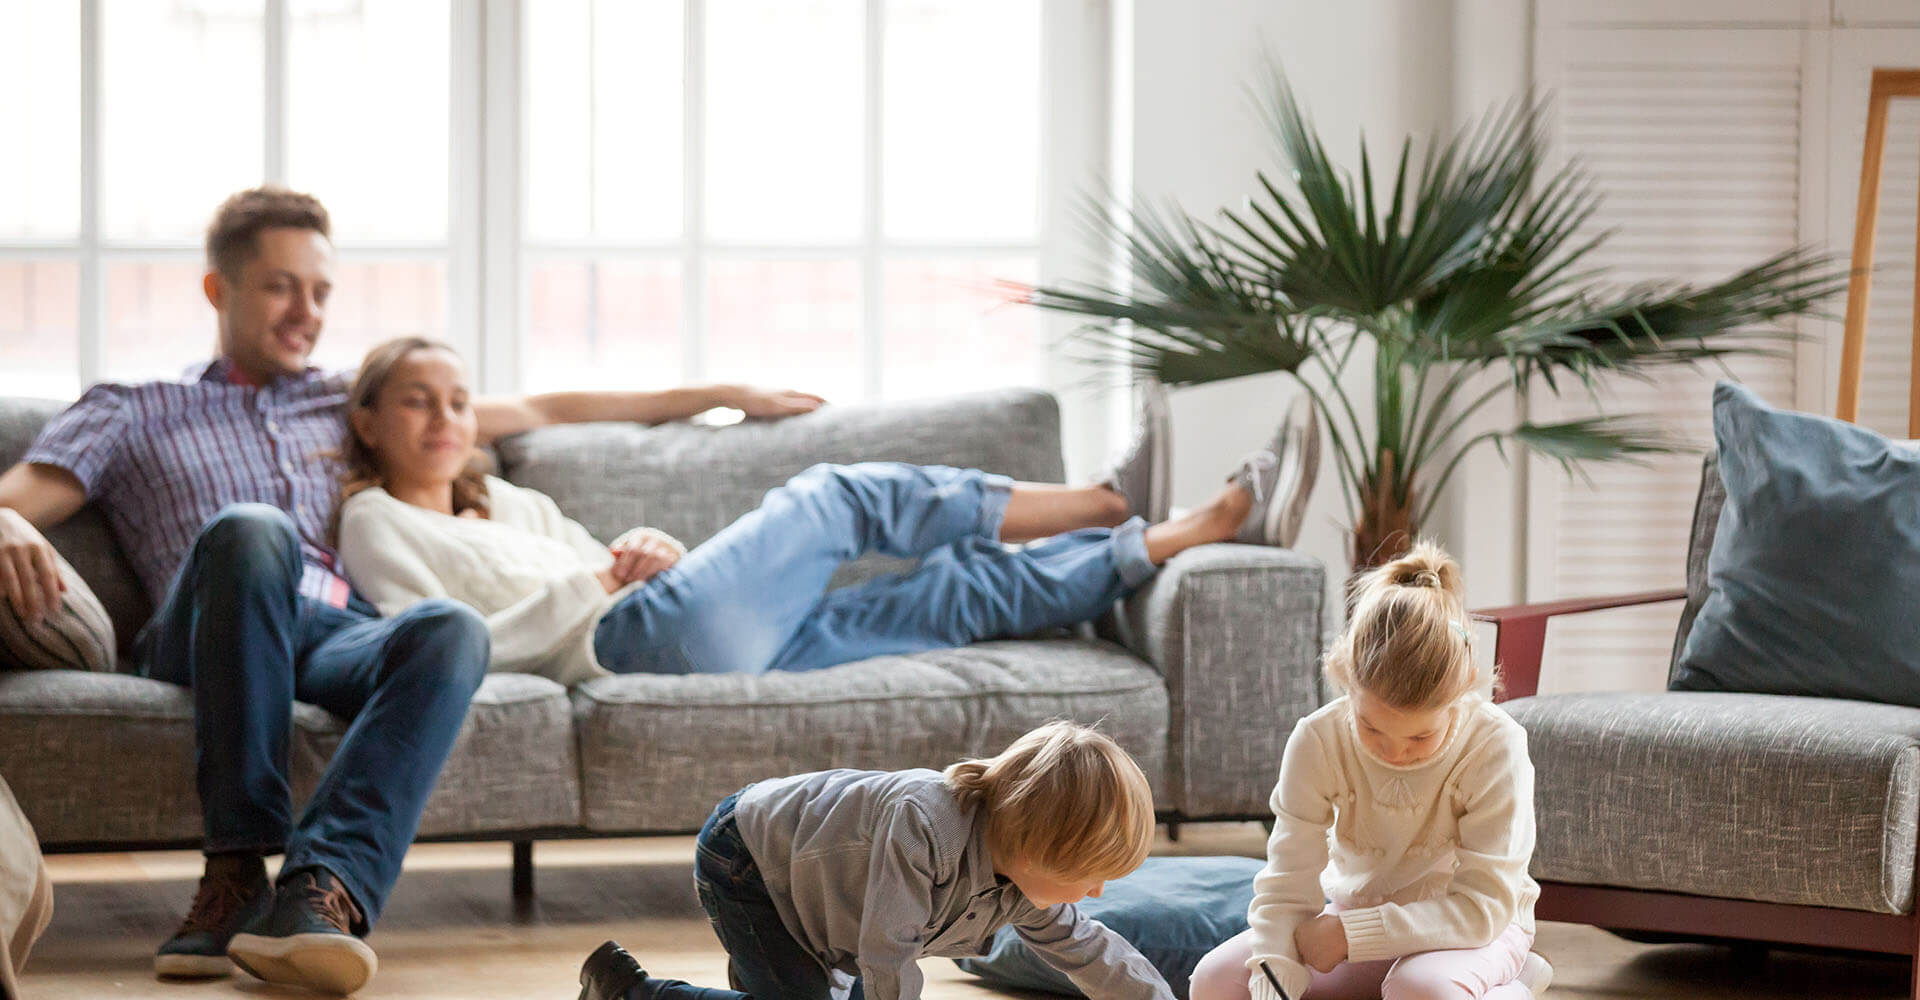 Family in the living room - the parents are sitting relaxed on the couch while the children are playing exuberantly